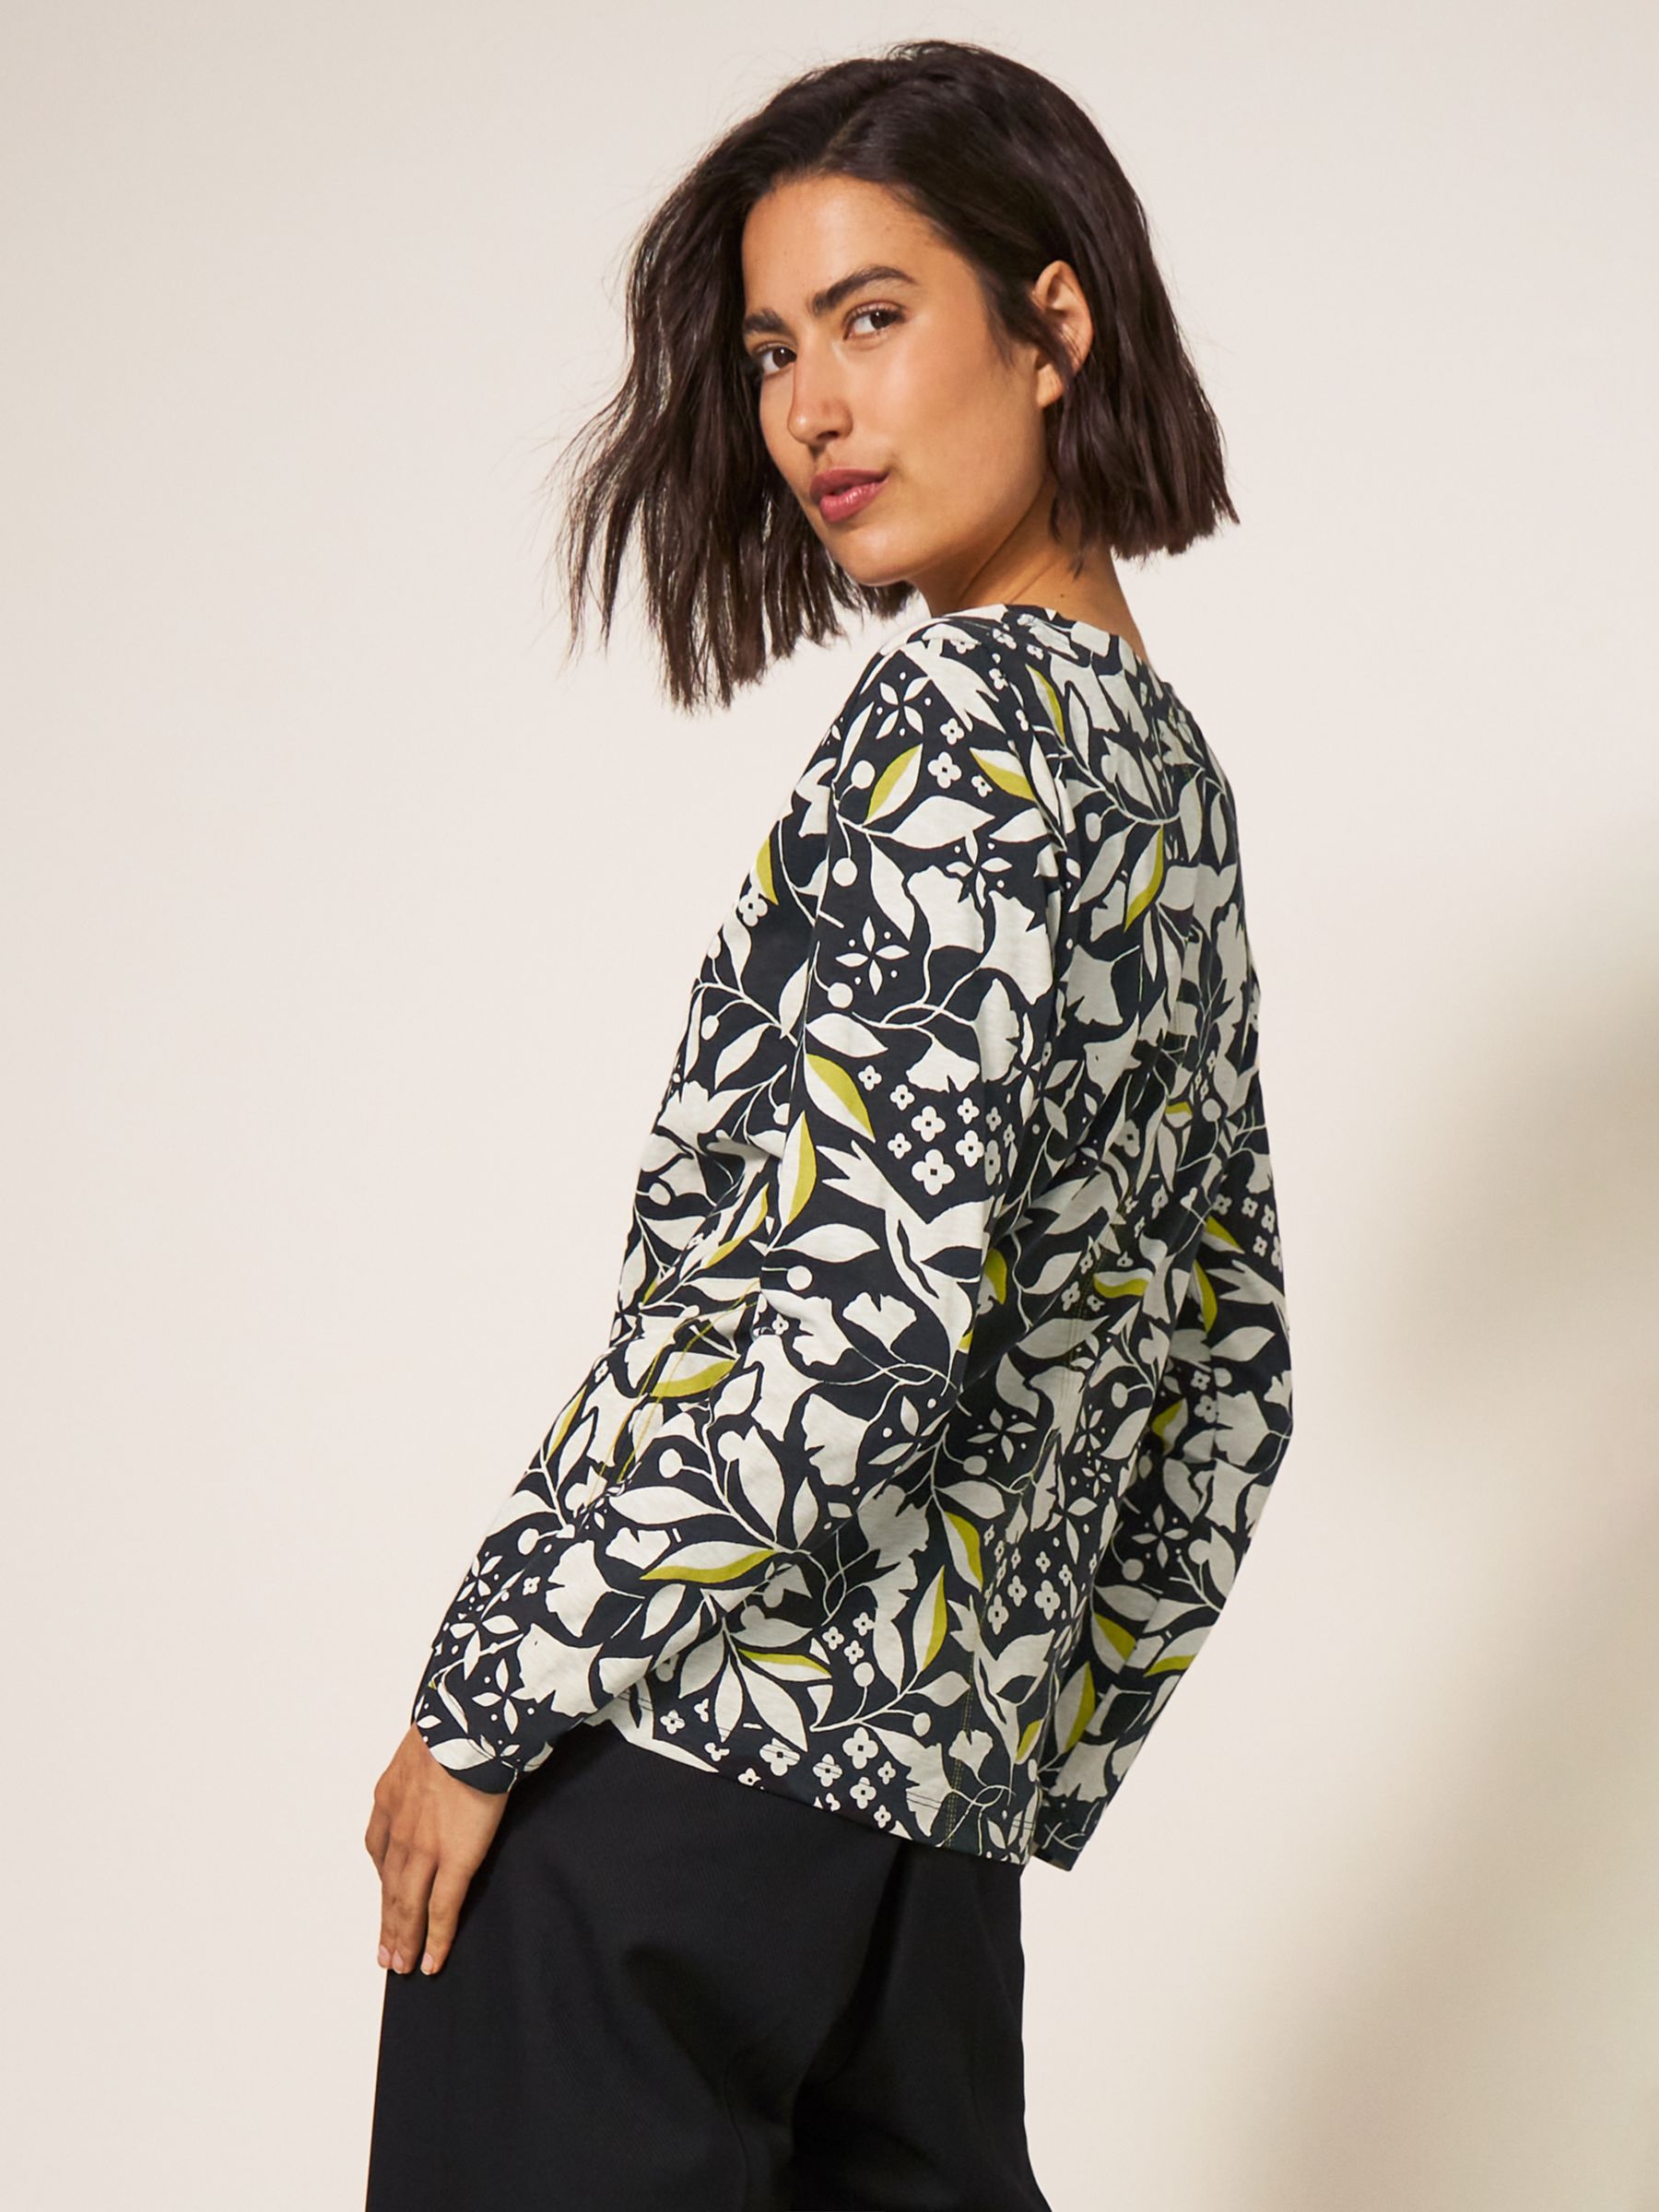 White Stuff Nelly Long Sleeve Floral T-Shirt, Black/Multi at John Lewis ...